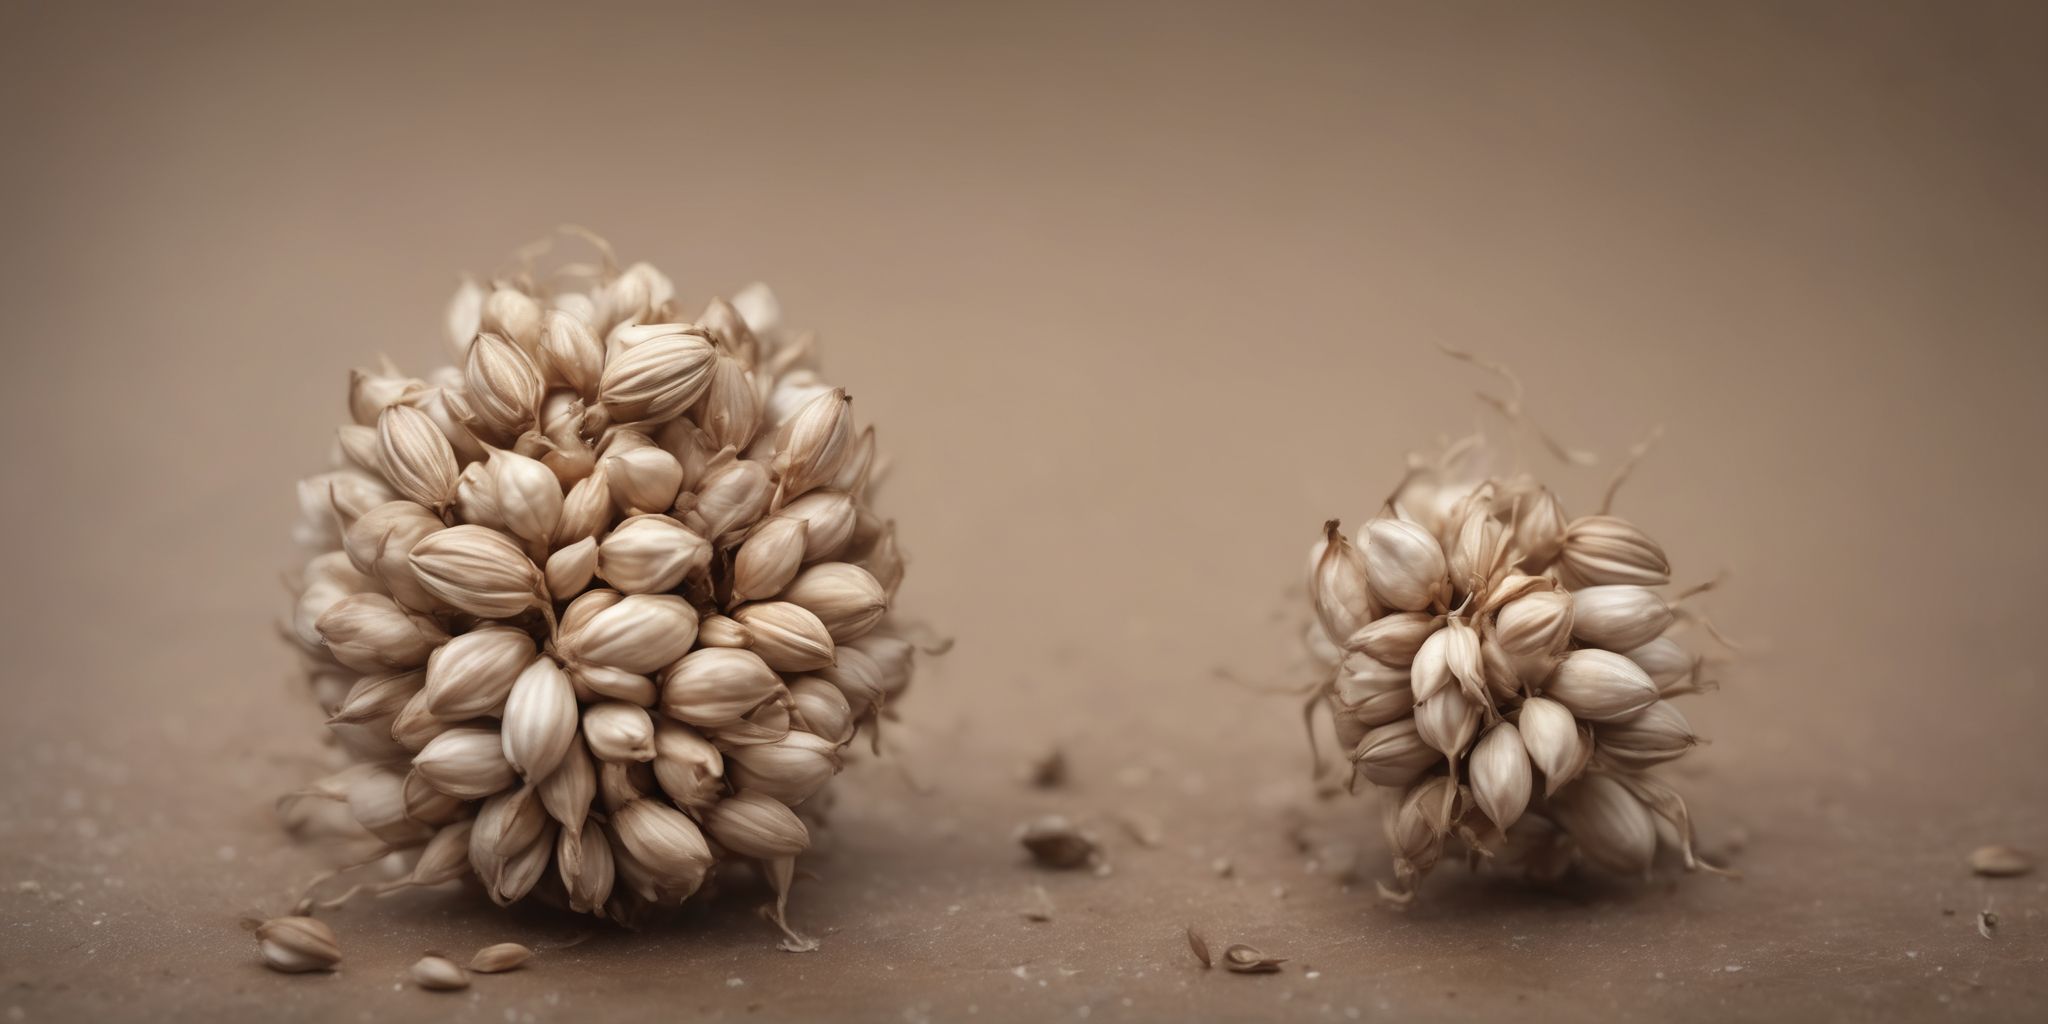 Seed  in realistic, photographic style